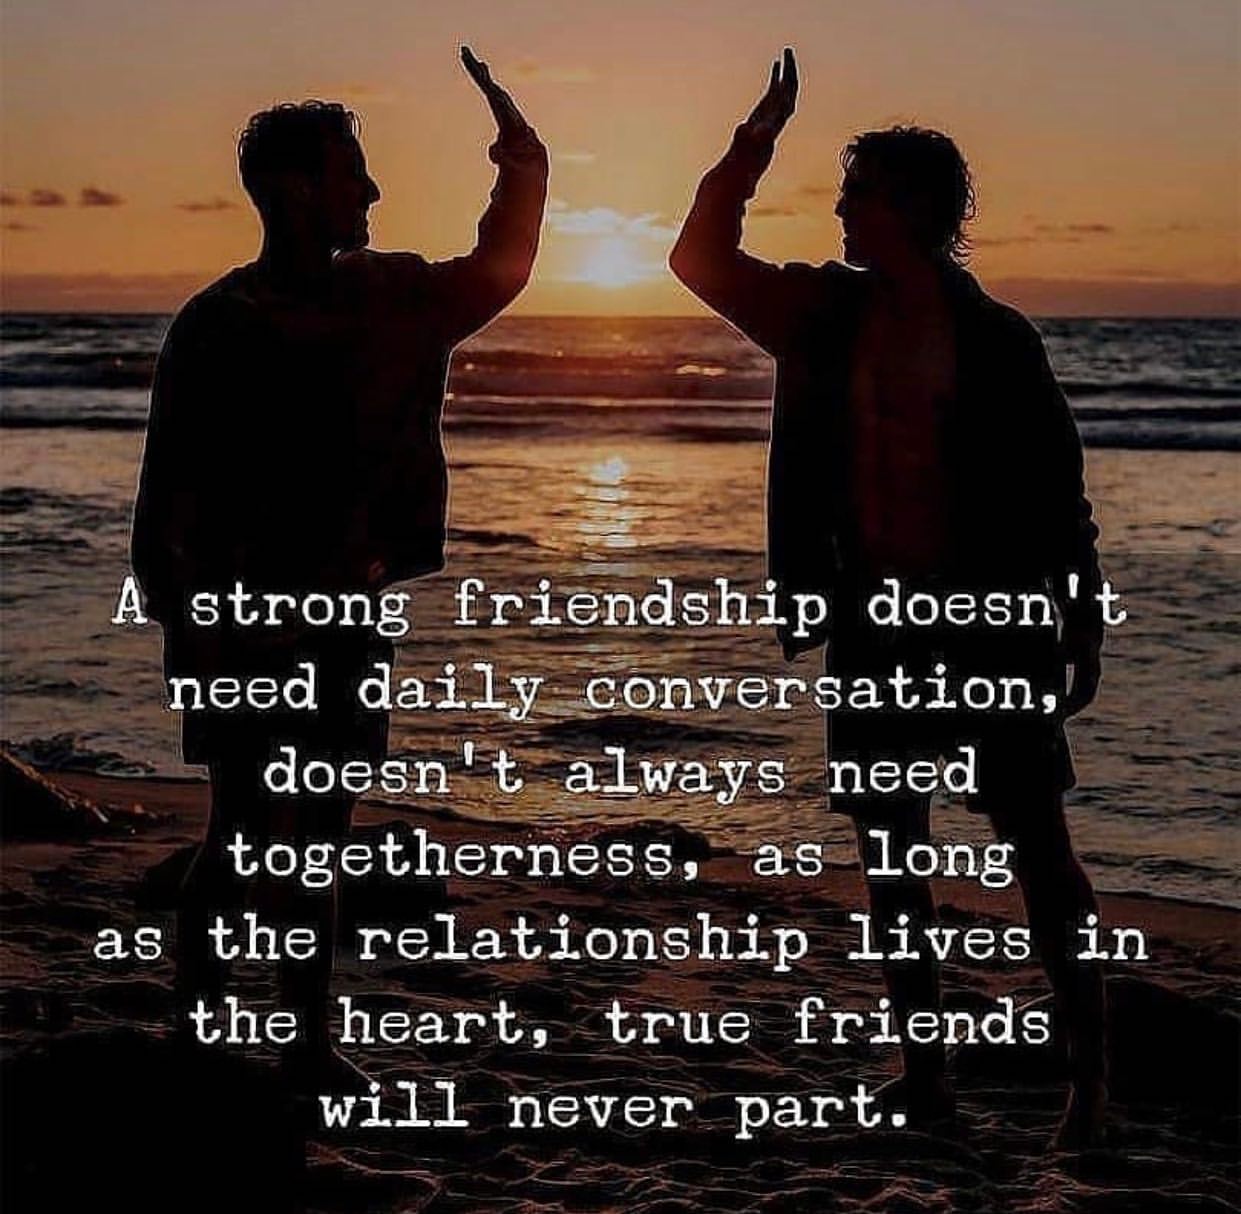 A strong friendship doesn't need daily conversation, doesn't always need togetherness, as long as the relationship lives in the heart, true friends will never part.